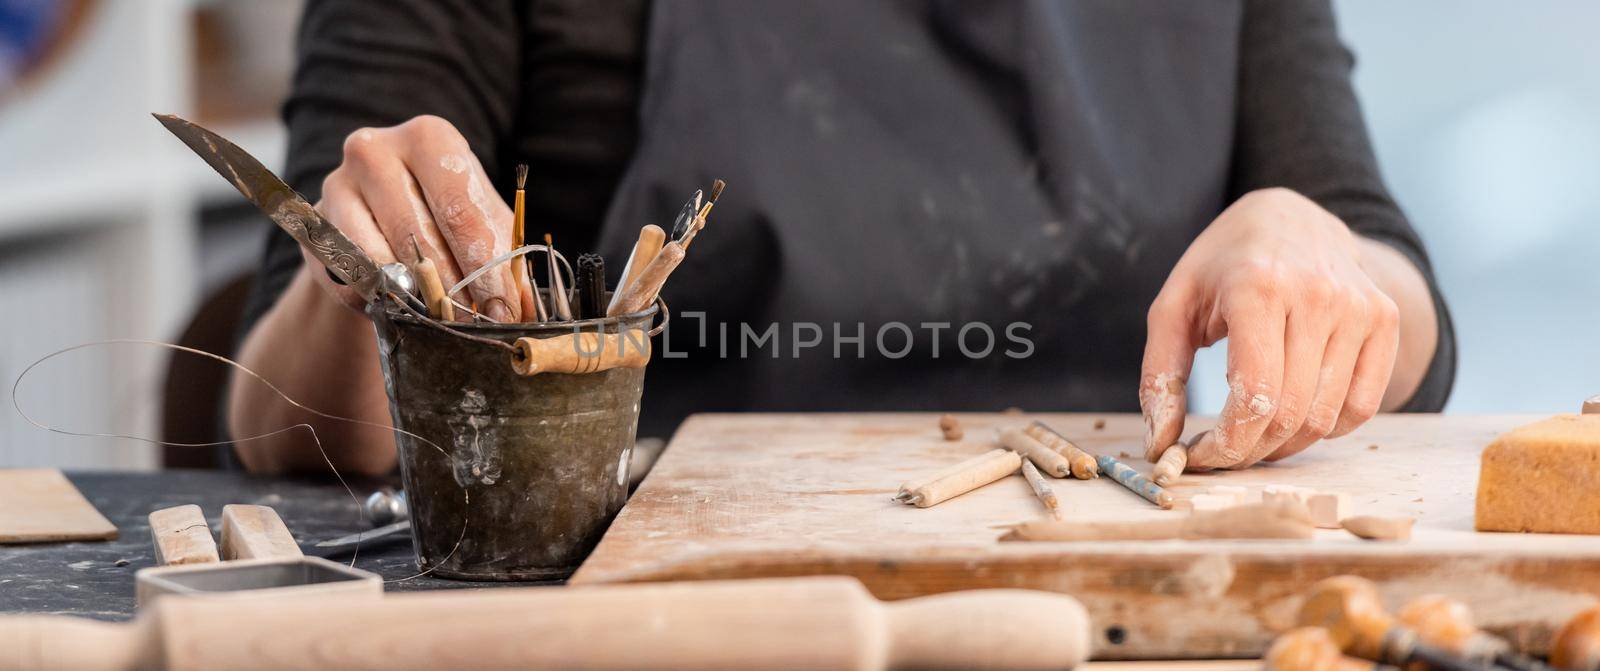 Working process of pottery with tools at home studio